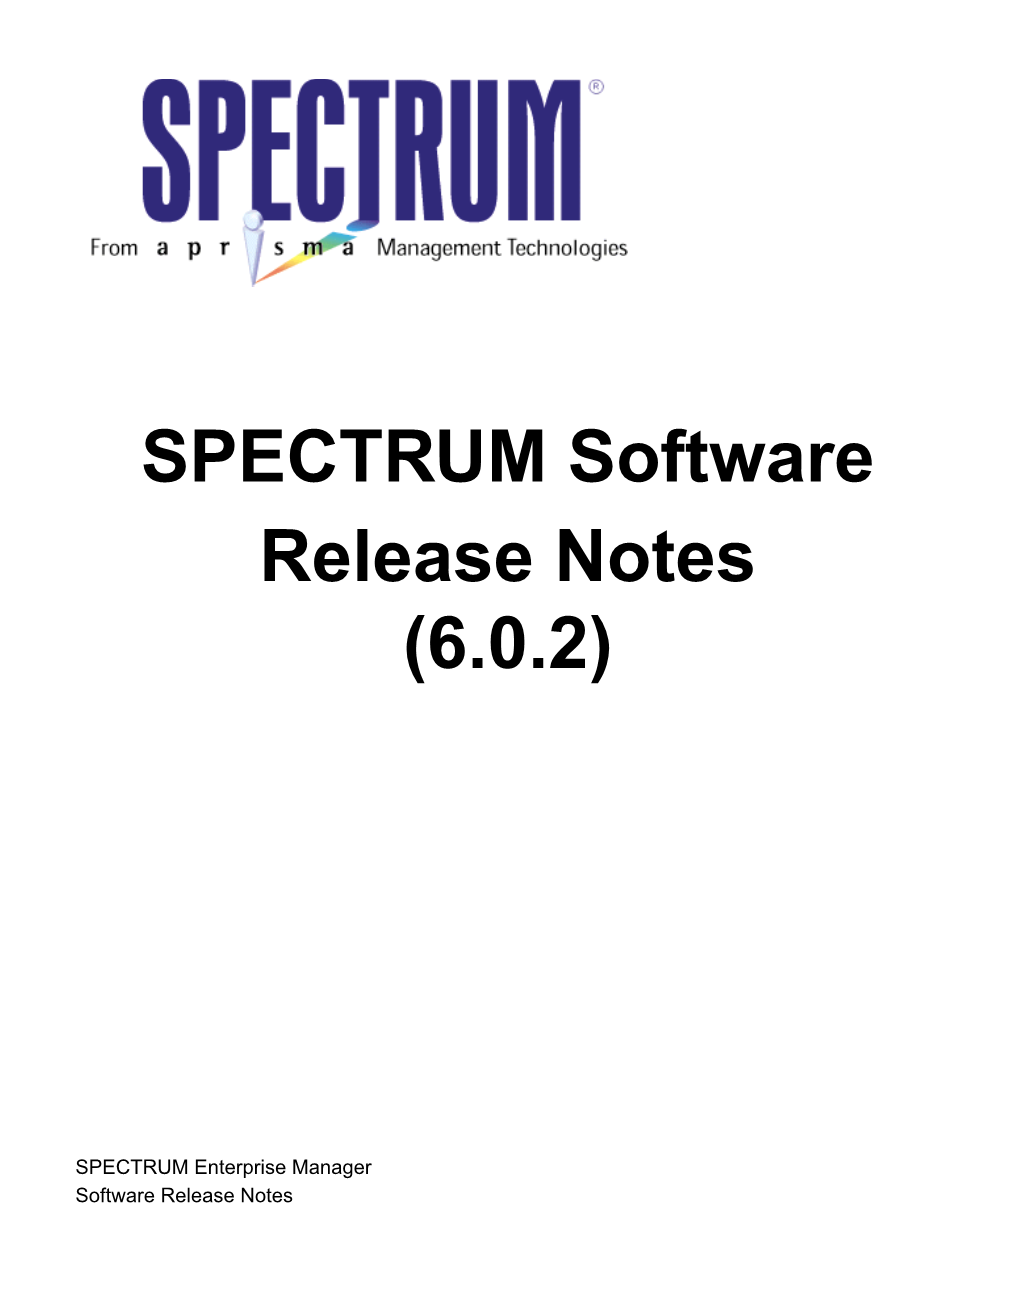 SPECTRUM Software Release Notes (6.0.2)